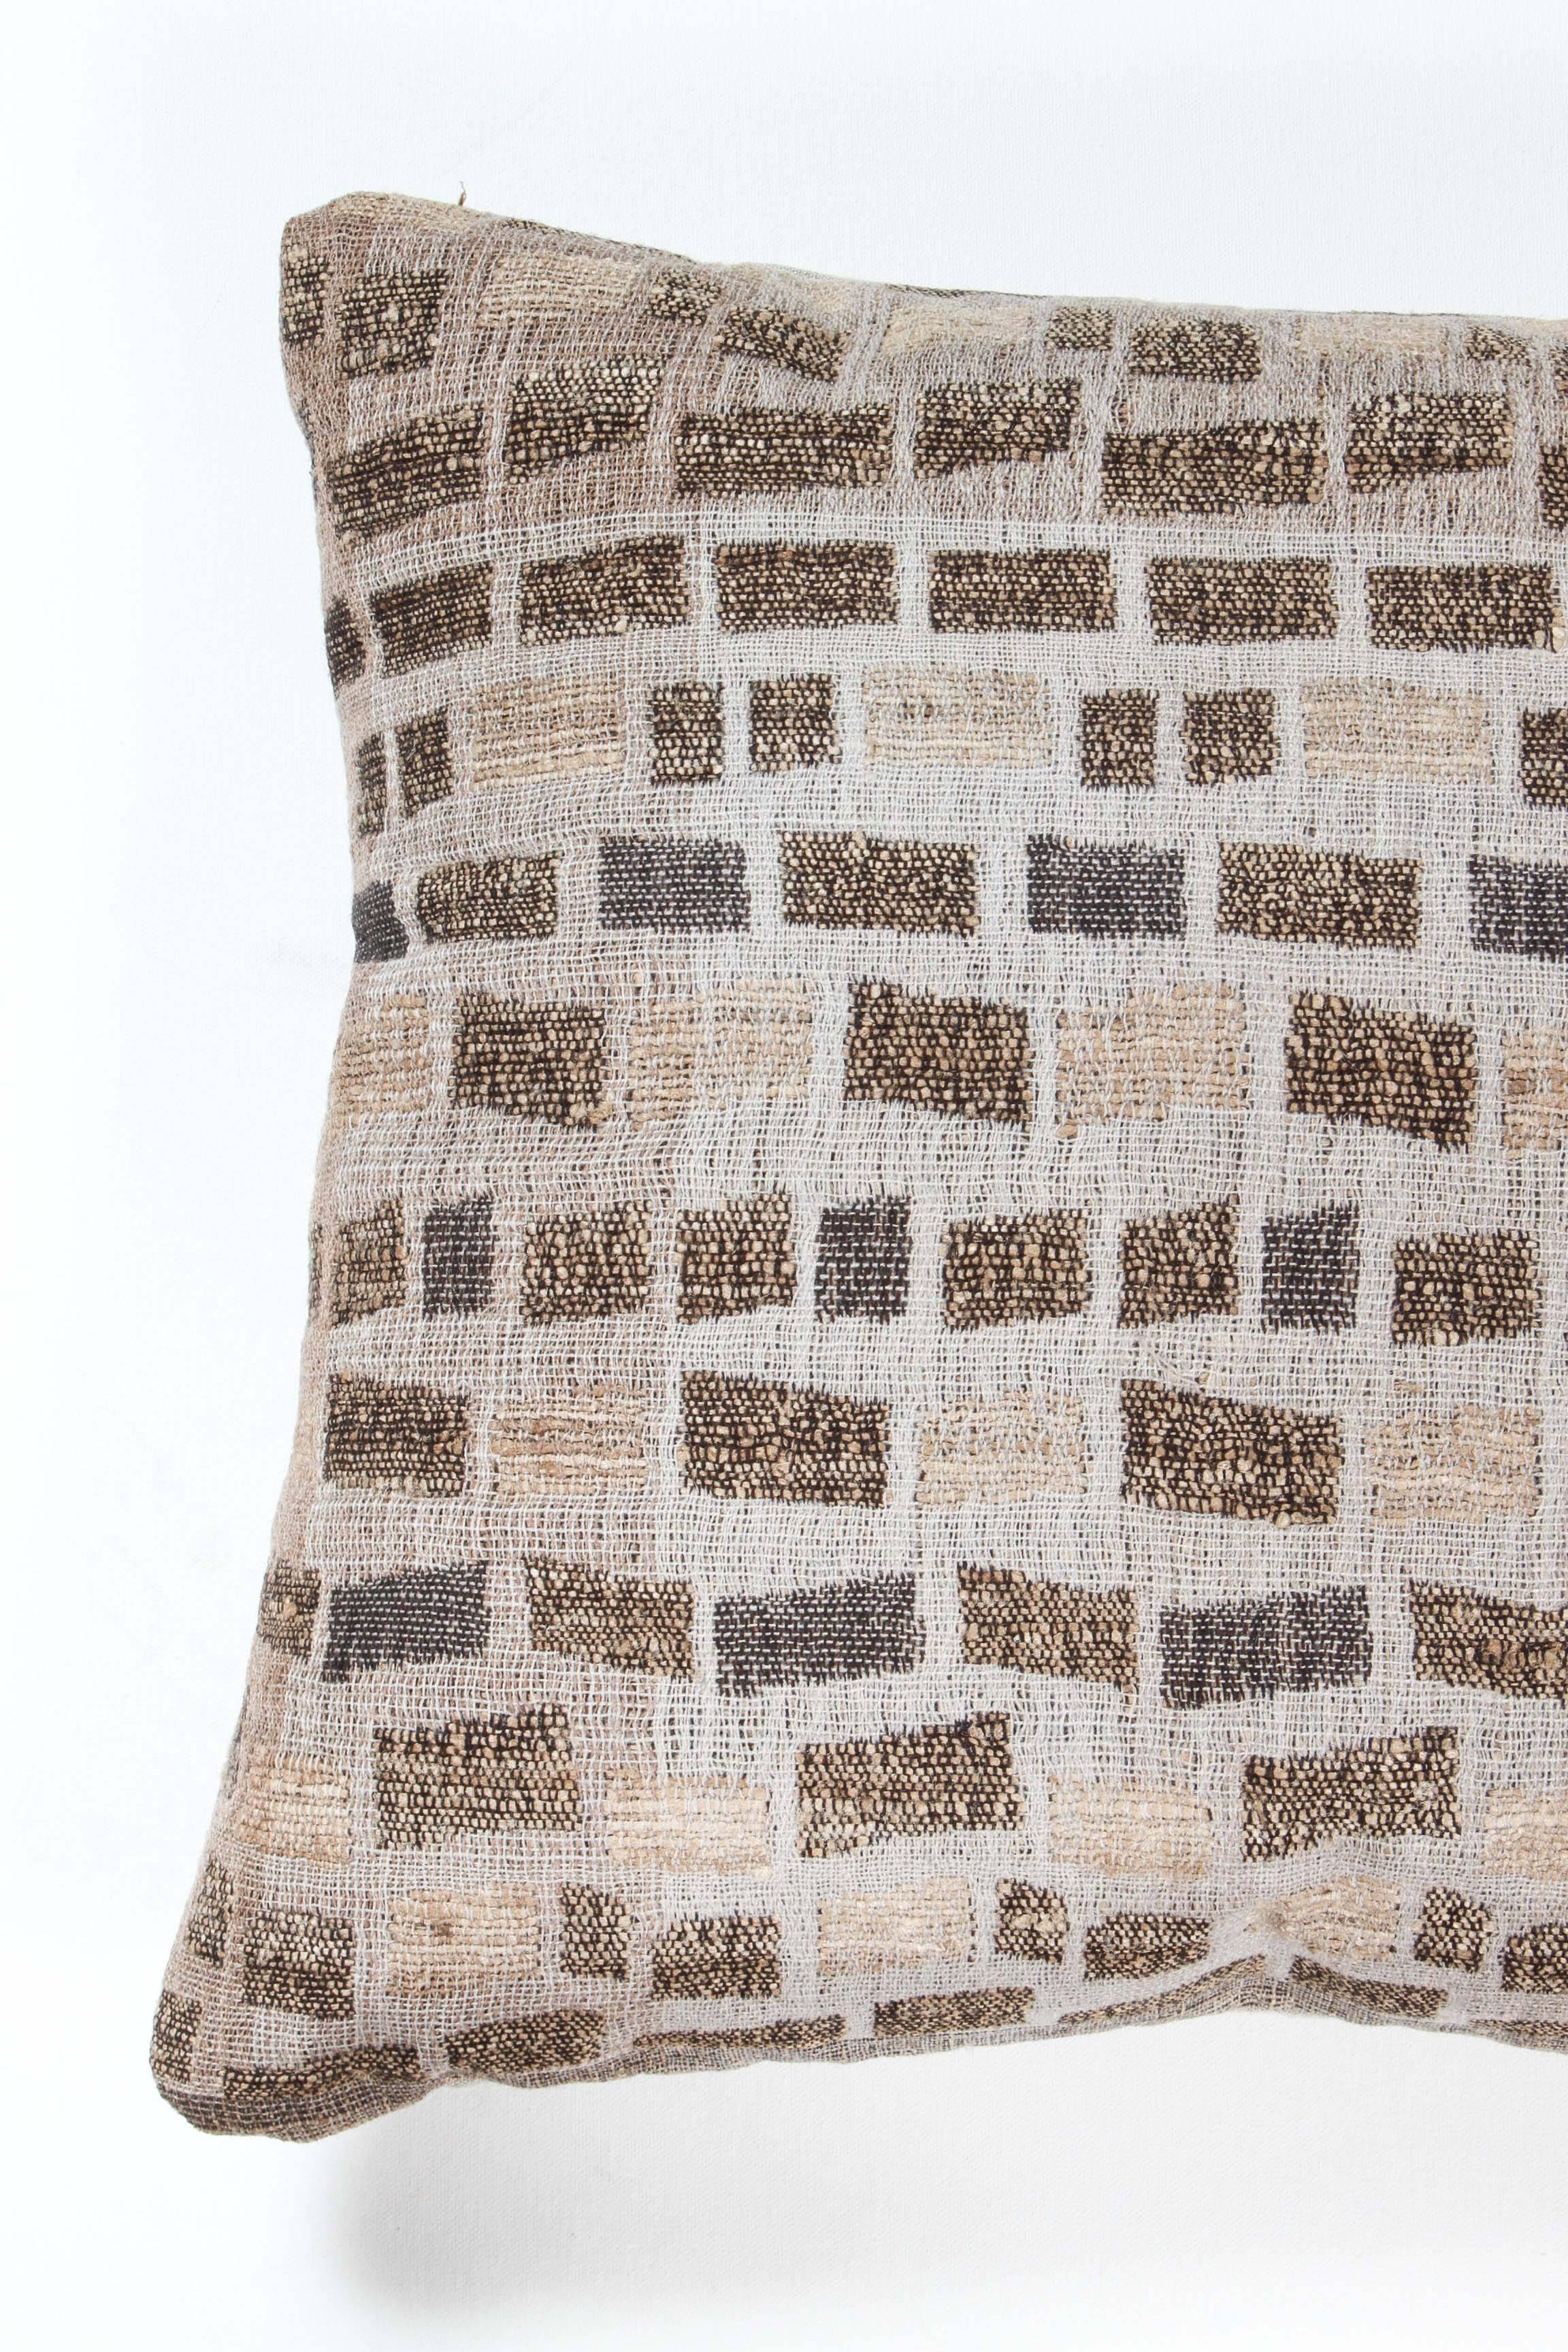 Hand-Woven Indian Handwoven Pillow, Grey, Beige and Black